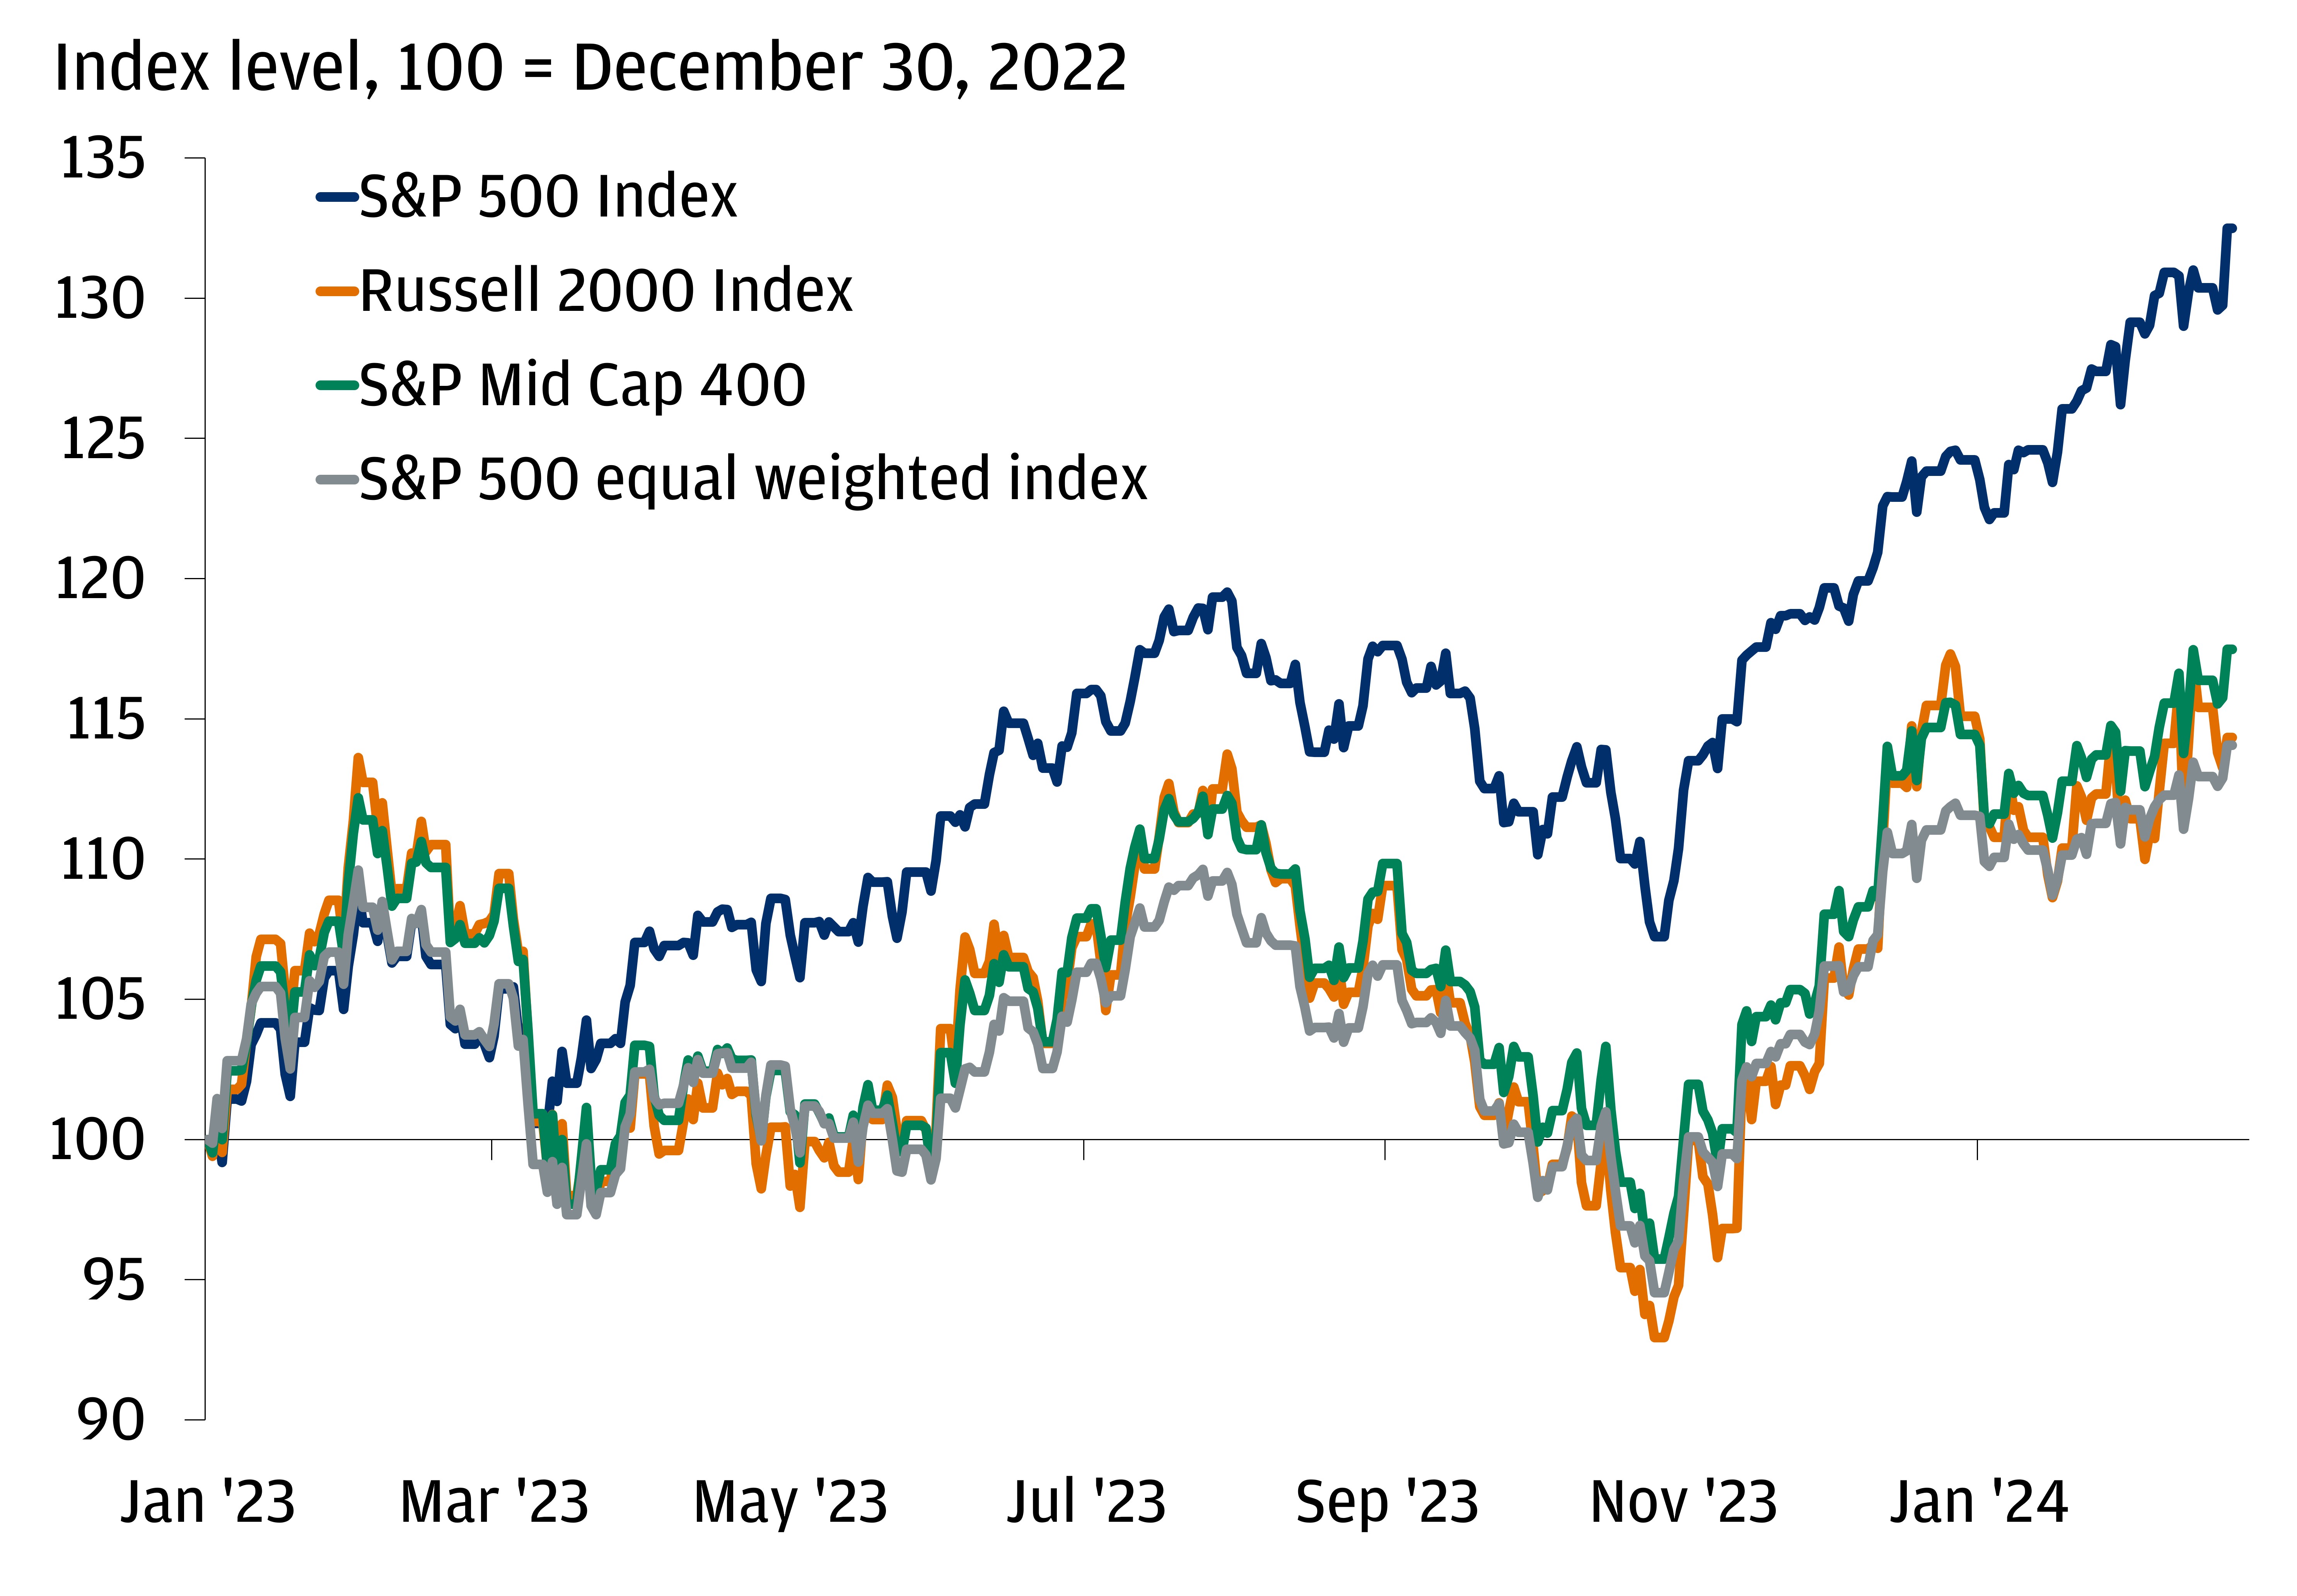 The chart describes the index performance for S&P 500, Russell 2000, S&P 400 MIDCAP, and S&P 500 equal weighted for 100=January 1, 2023.